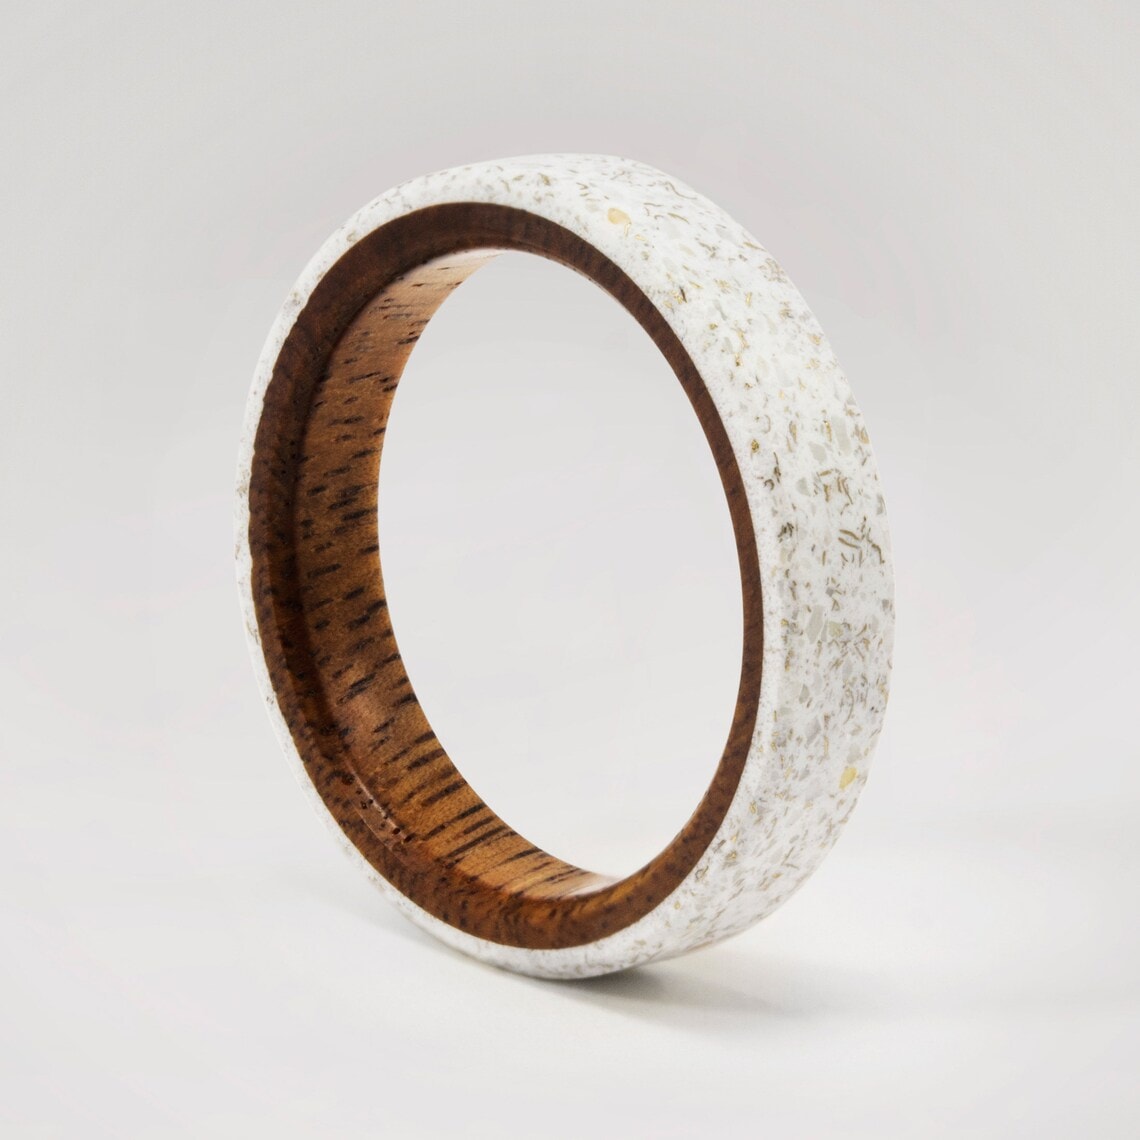 marble overlay wooden ring